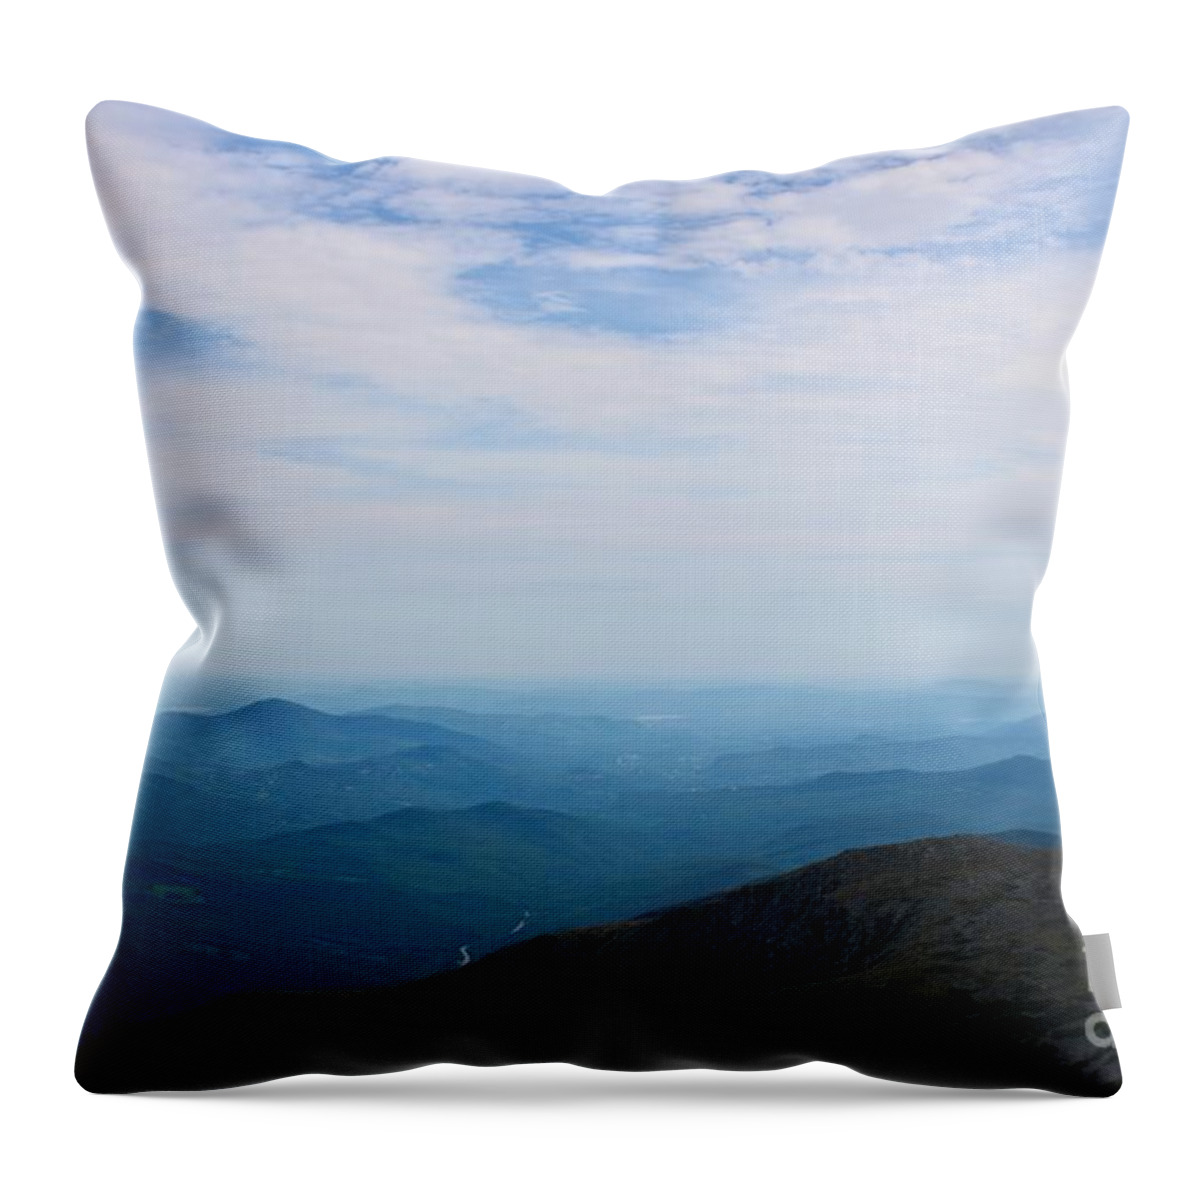 Mt. Washington Throw Pillow featuring the photograph Mt. Washington #8 by Deena Withycombe